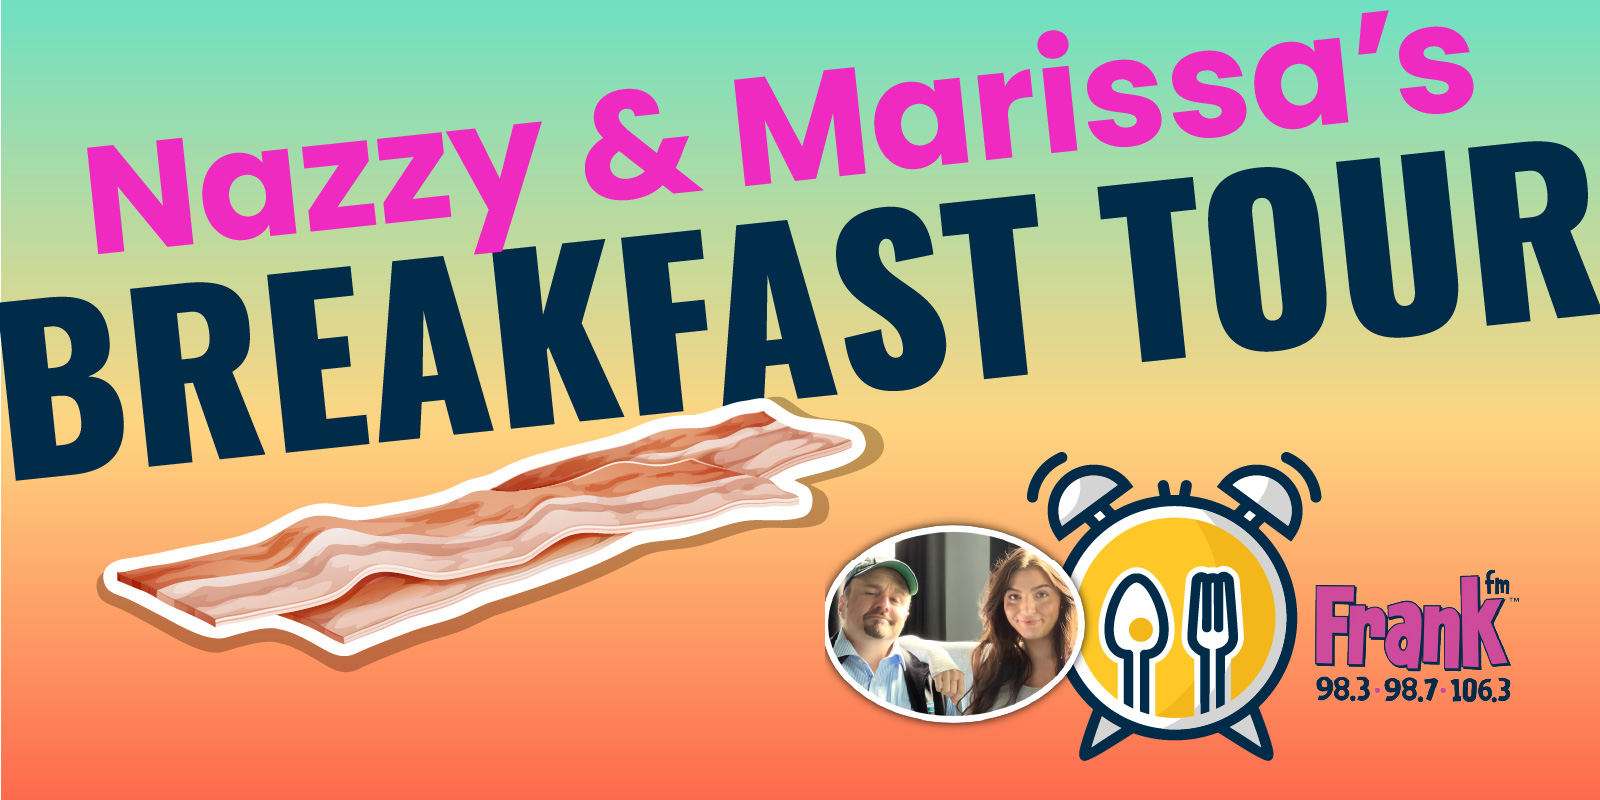 Nazzy and Marissa’s Breakfast Tour!